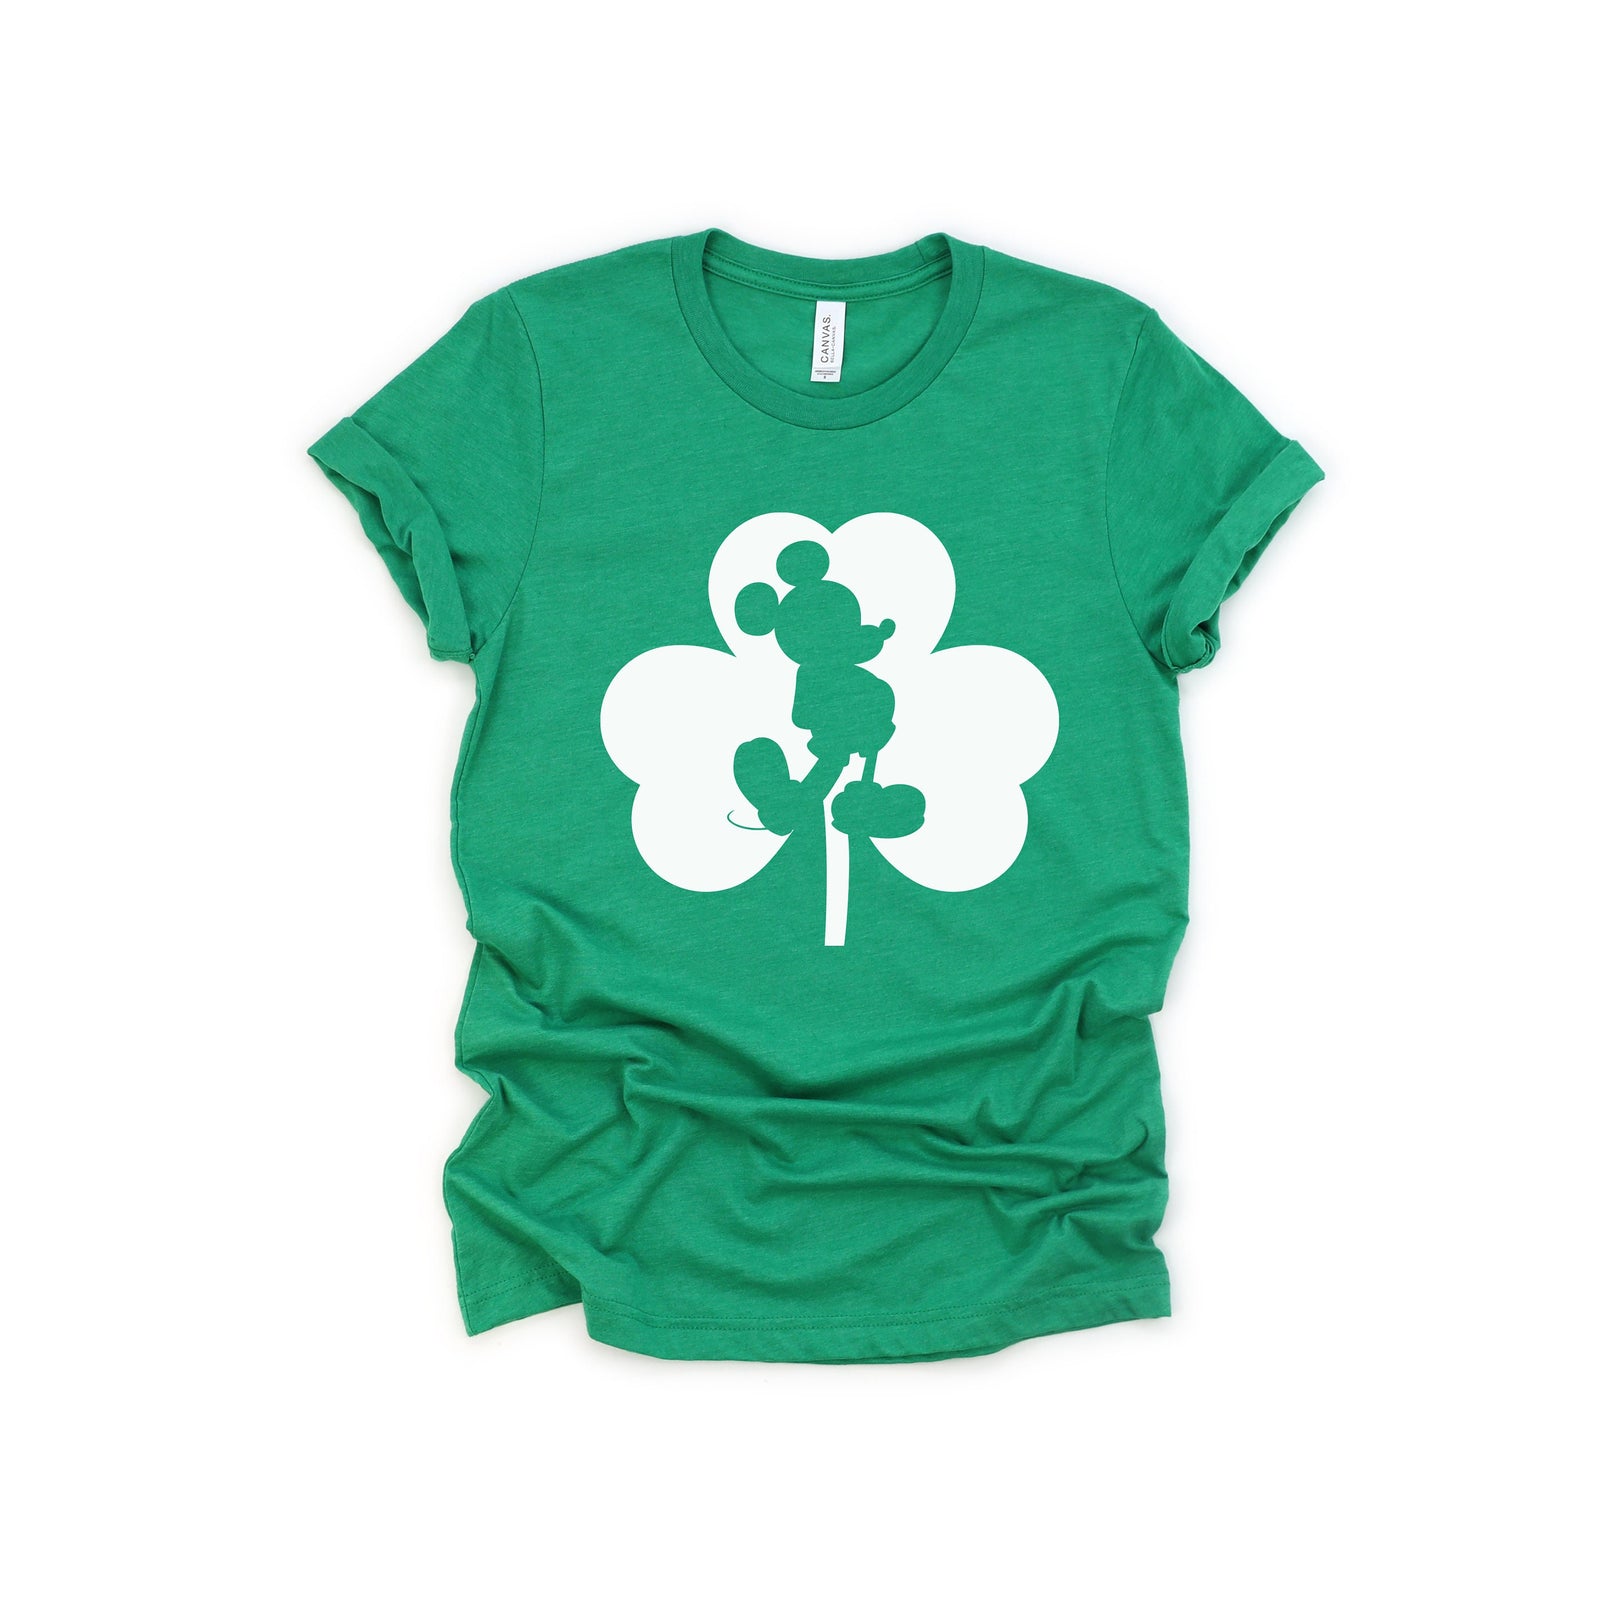 St. Patrick's Day Mickey Mouse T Shirt- Outline Silhouette inside Shamrock - Clover - Lucky Mickey - Disney St. Patty's Day